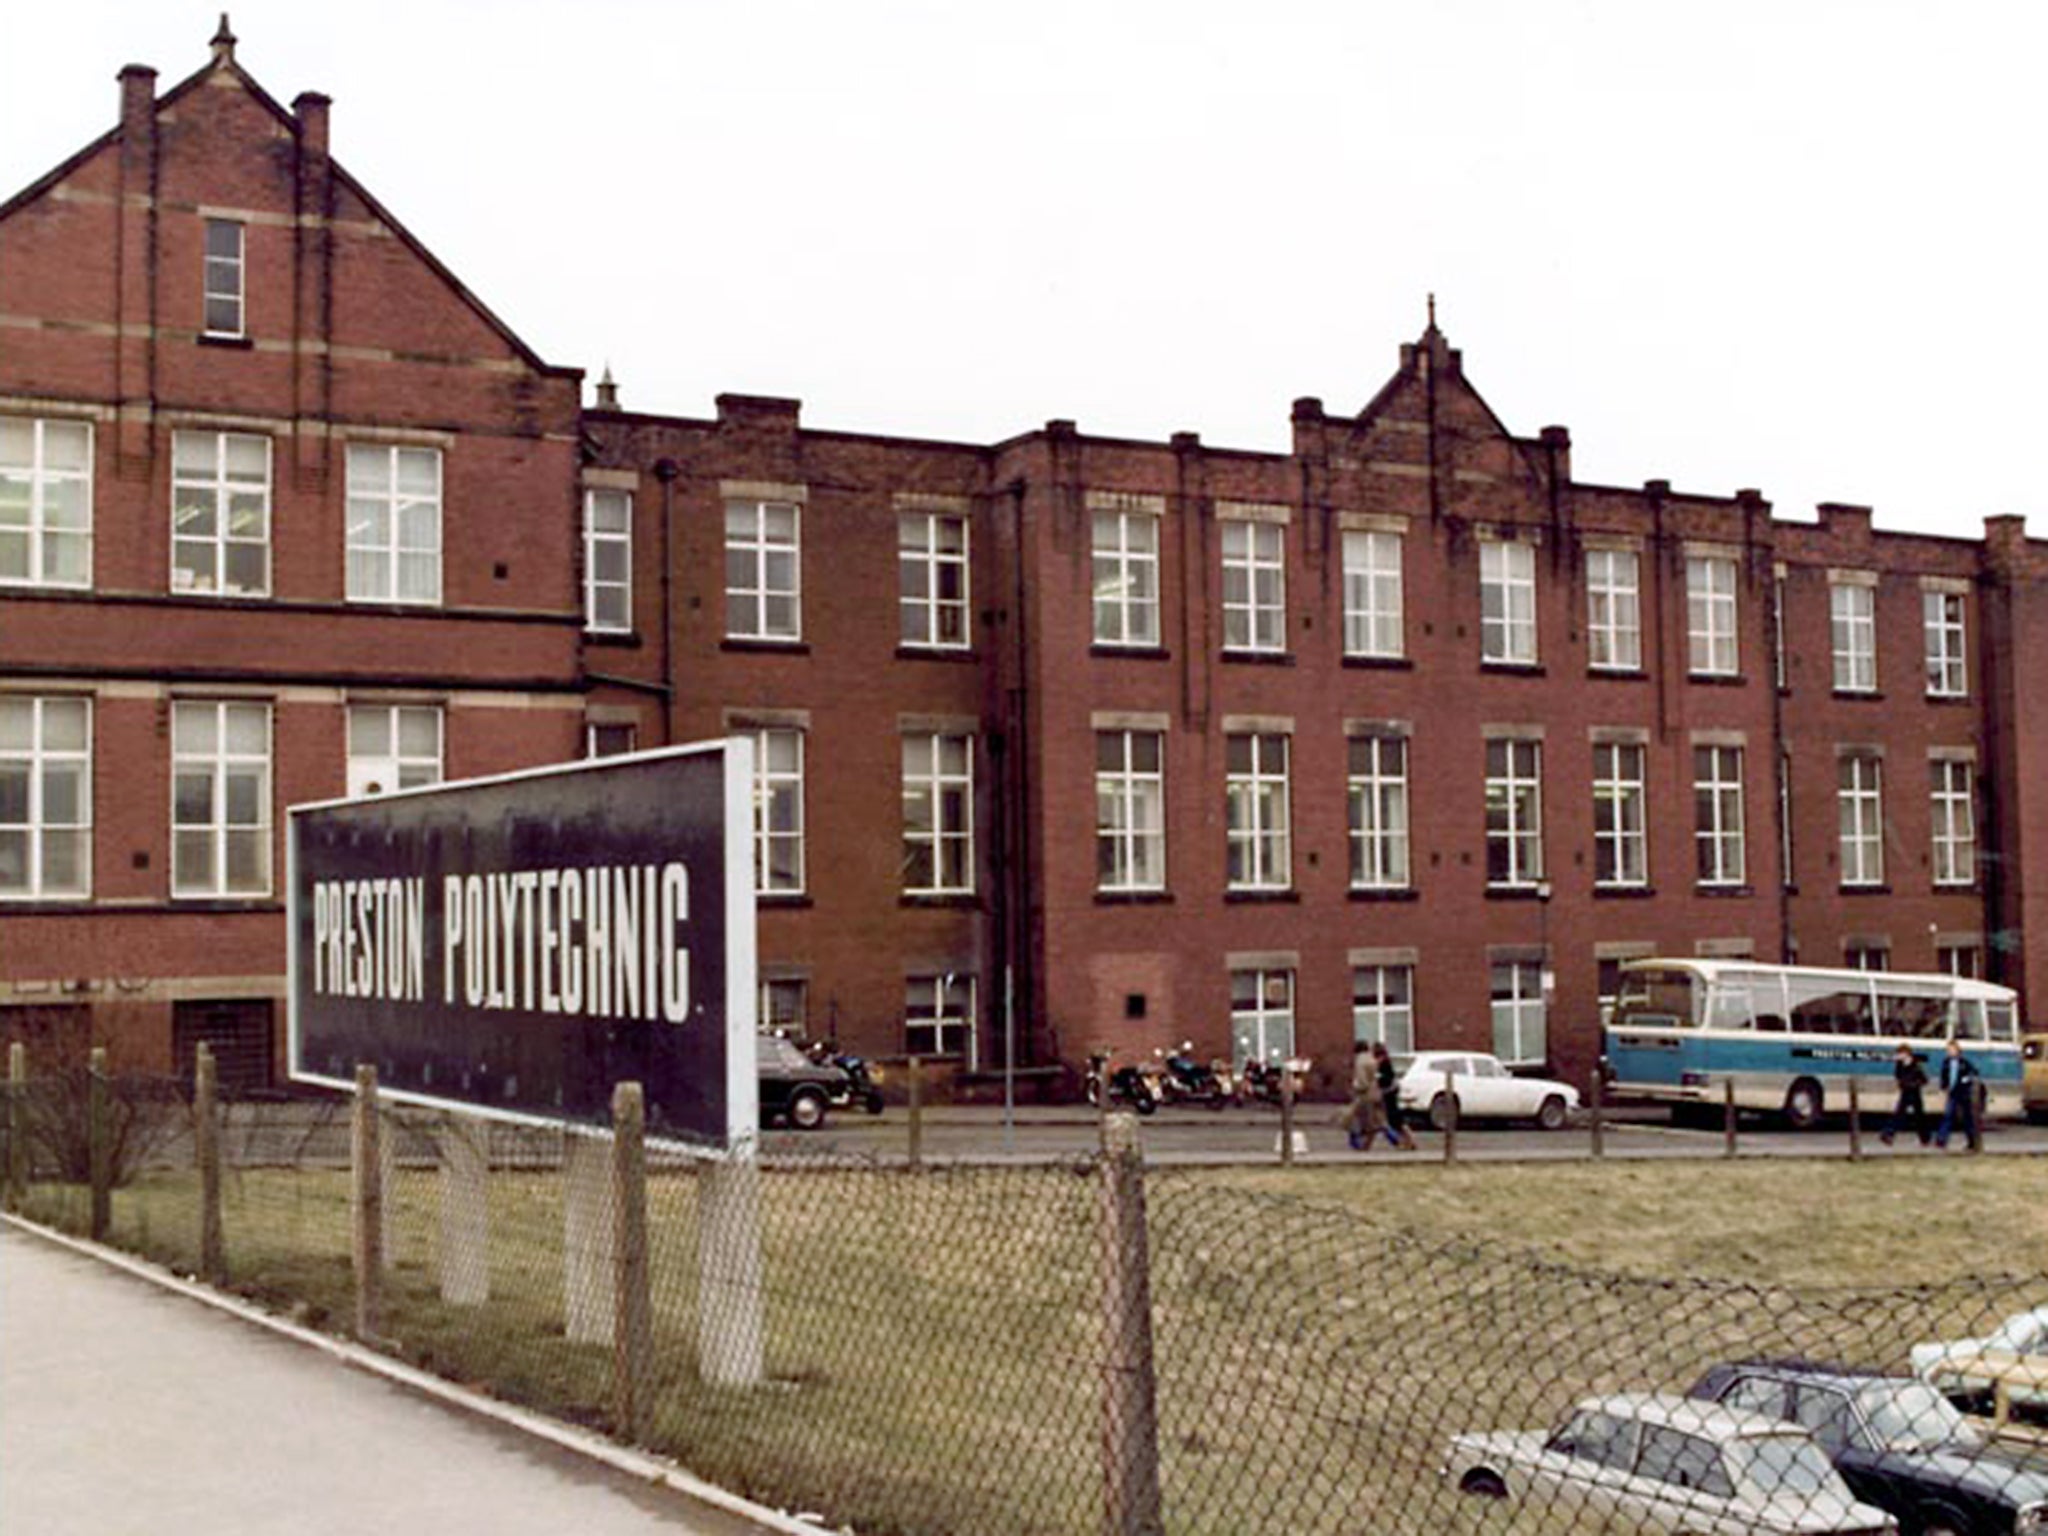 Preston Polytechnic, which started teaching journalism in 1962, is now The University of Central Lancashire